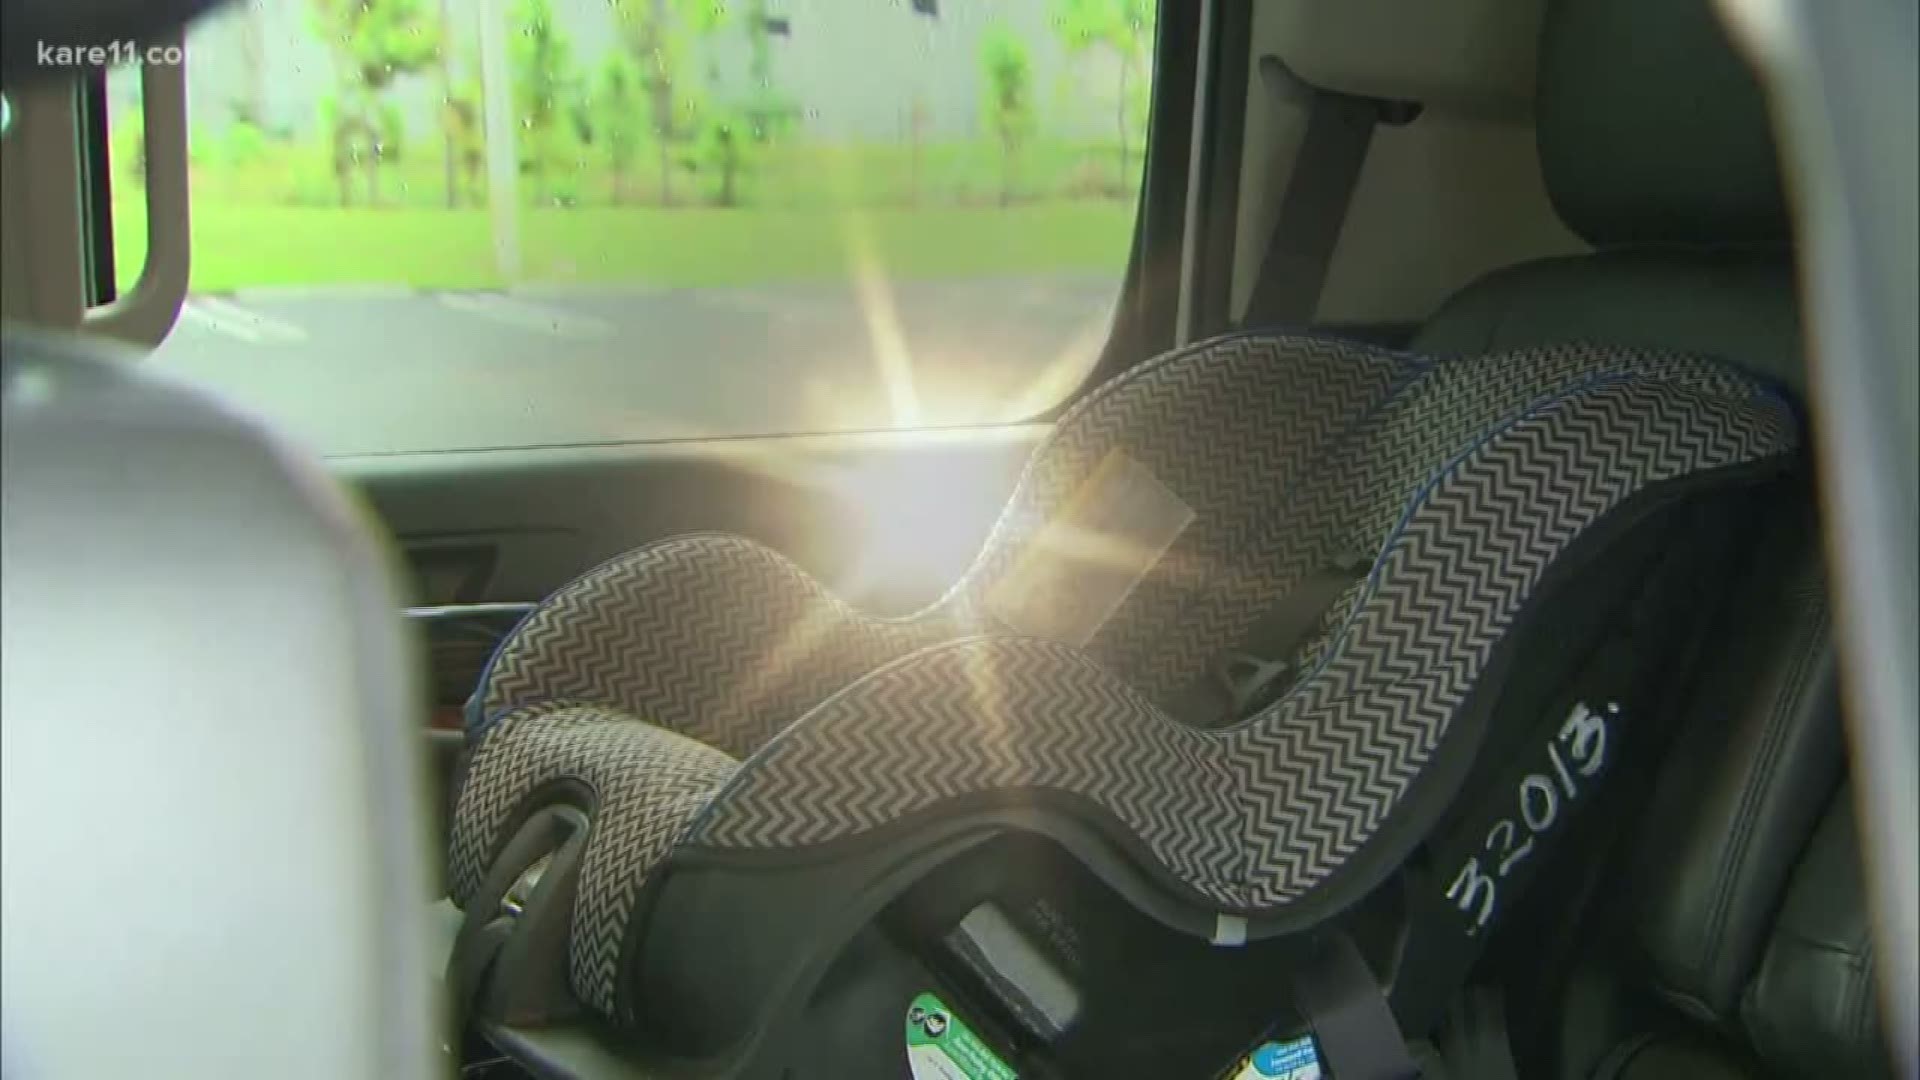 Authorities already getting calls of kids left in hot cars